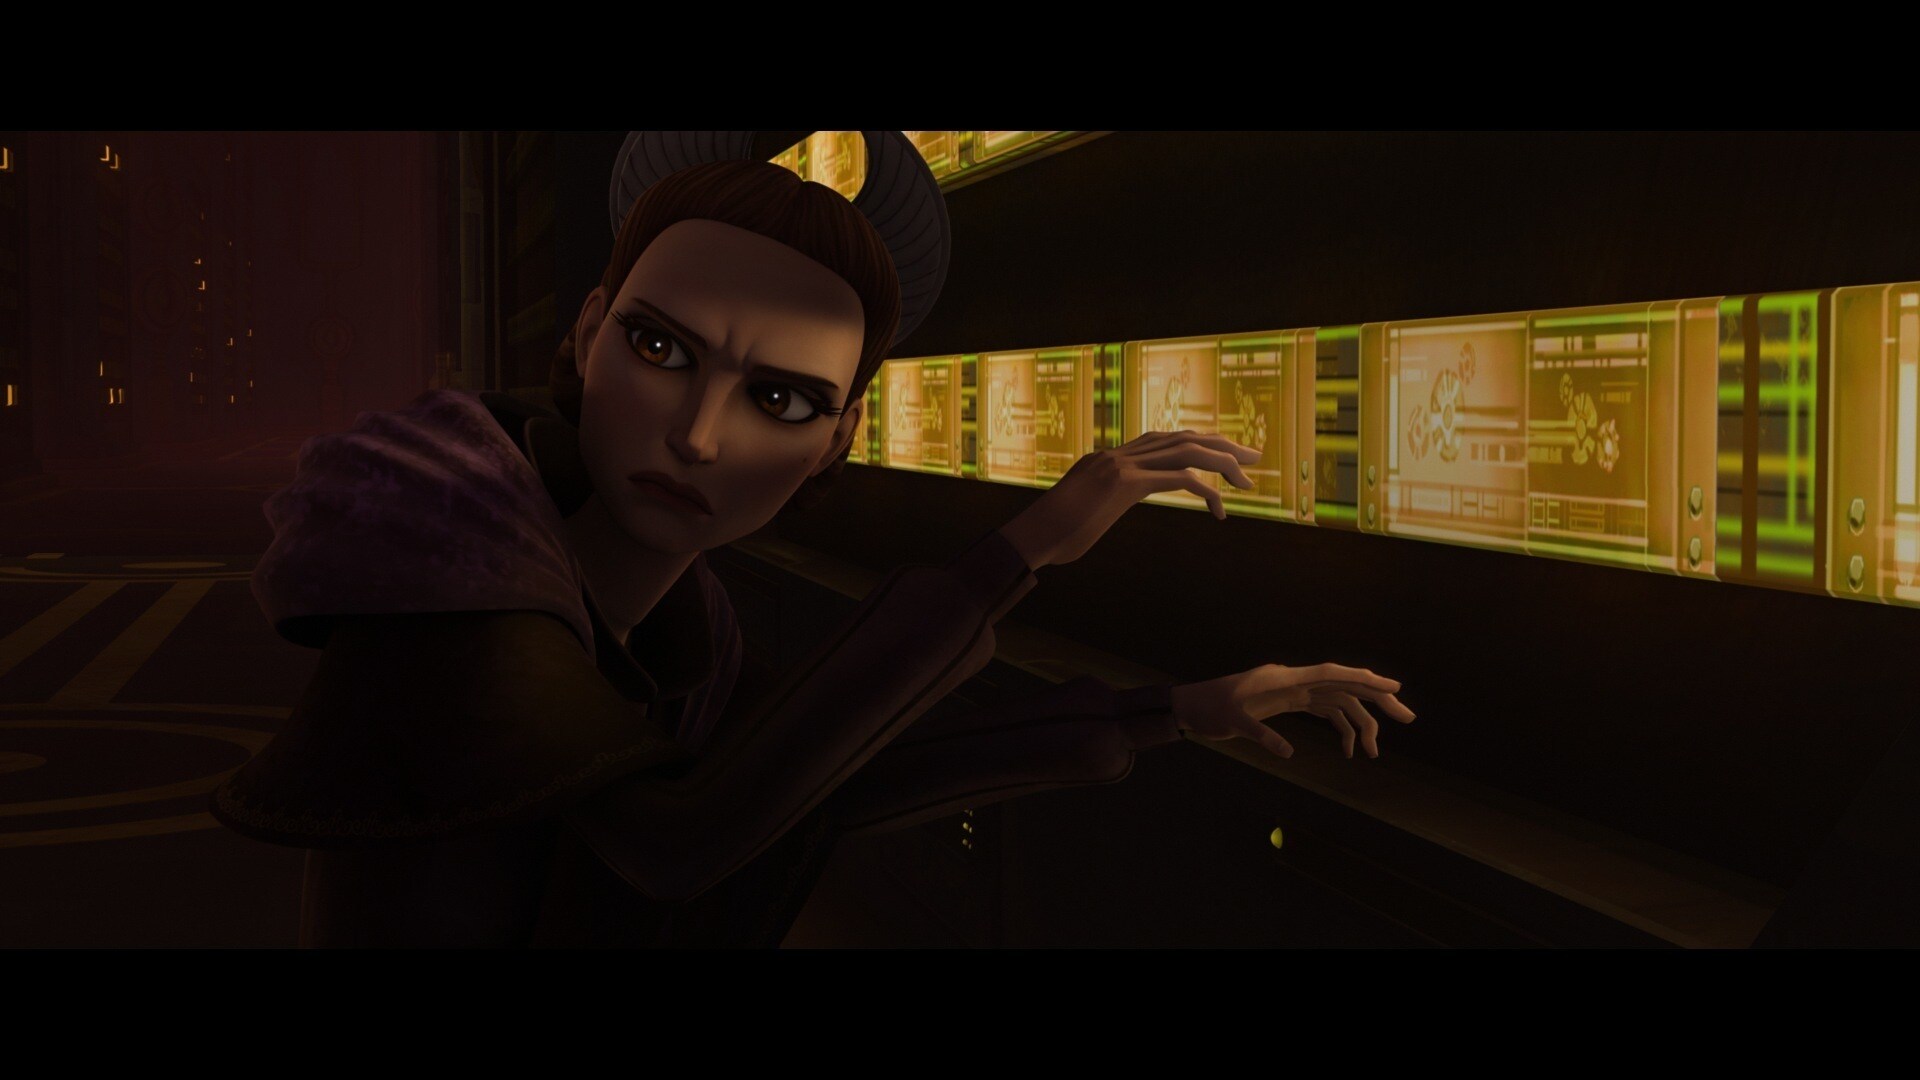 As the Core Five Muuns panic, Padmé darts into the darkness. Emergency power keeps the mainframe ...